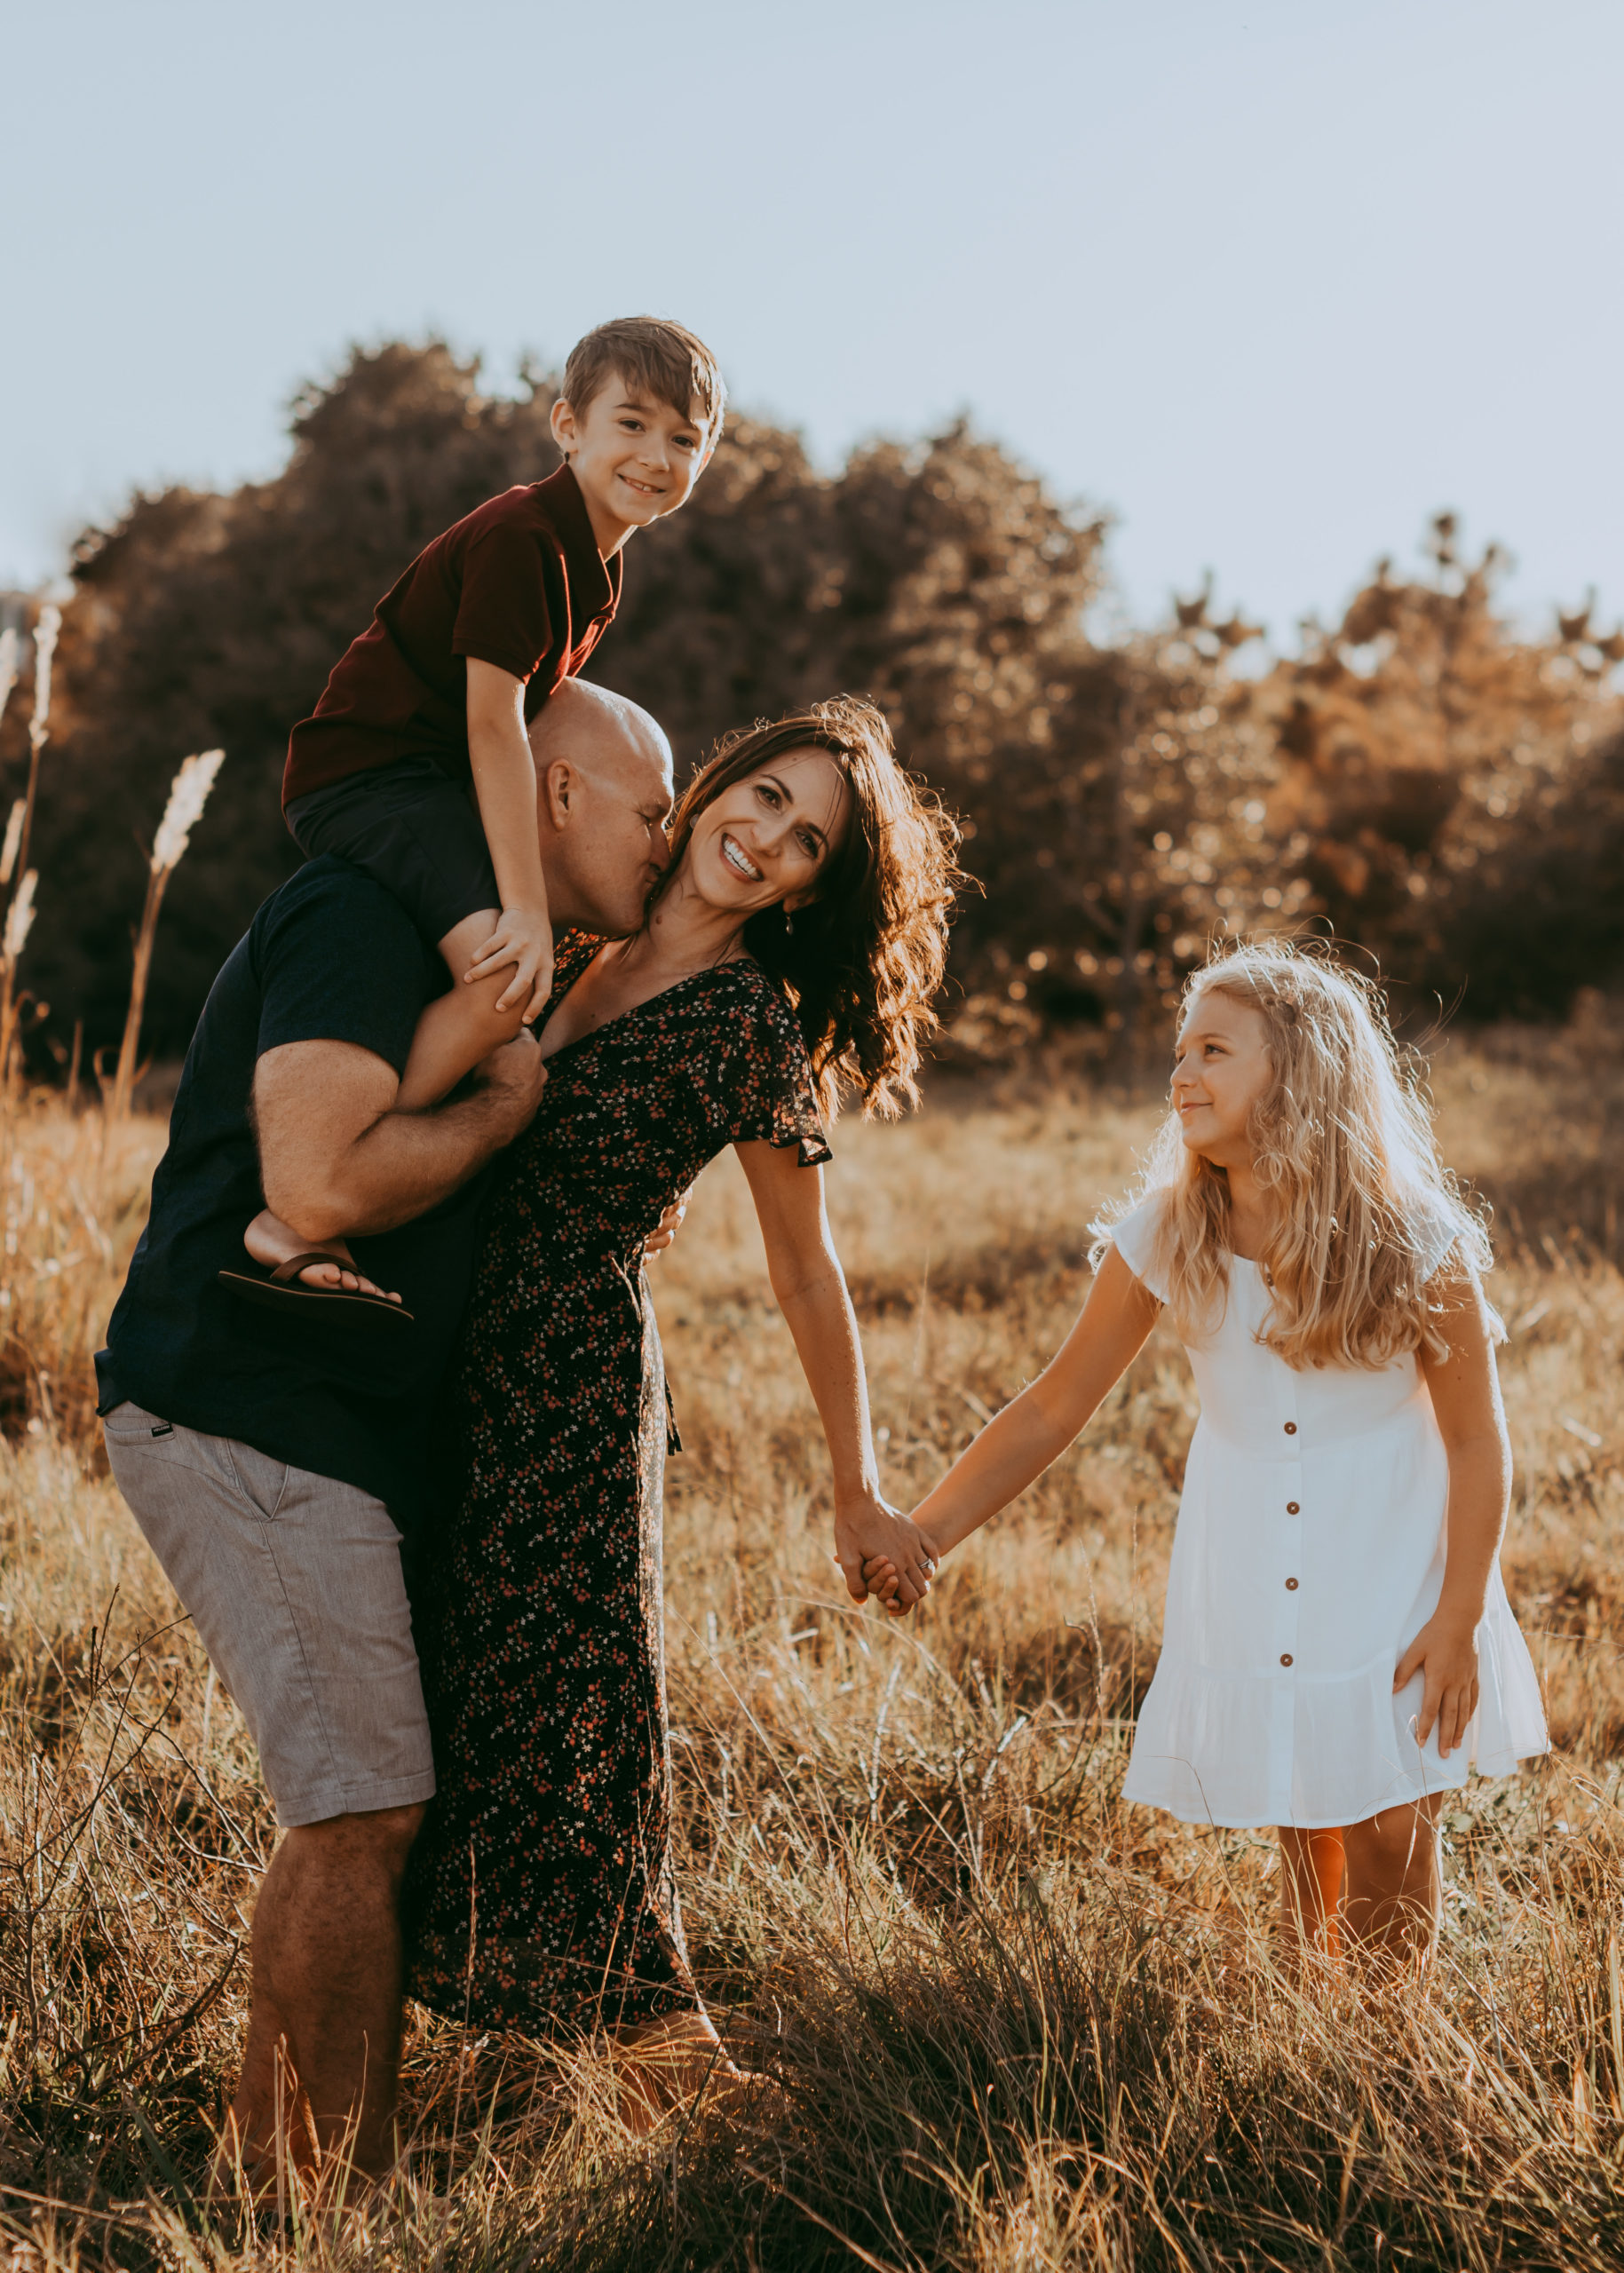 beautiful family moments in a warm sunny field of beach grass by laura walter photography 